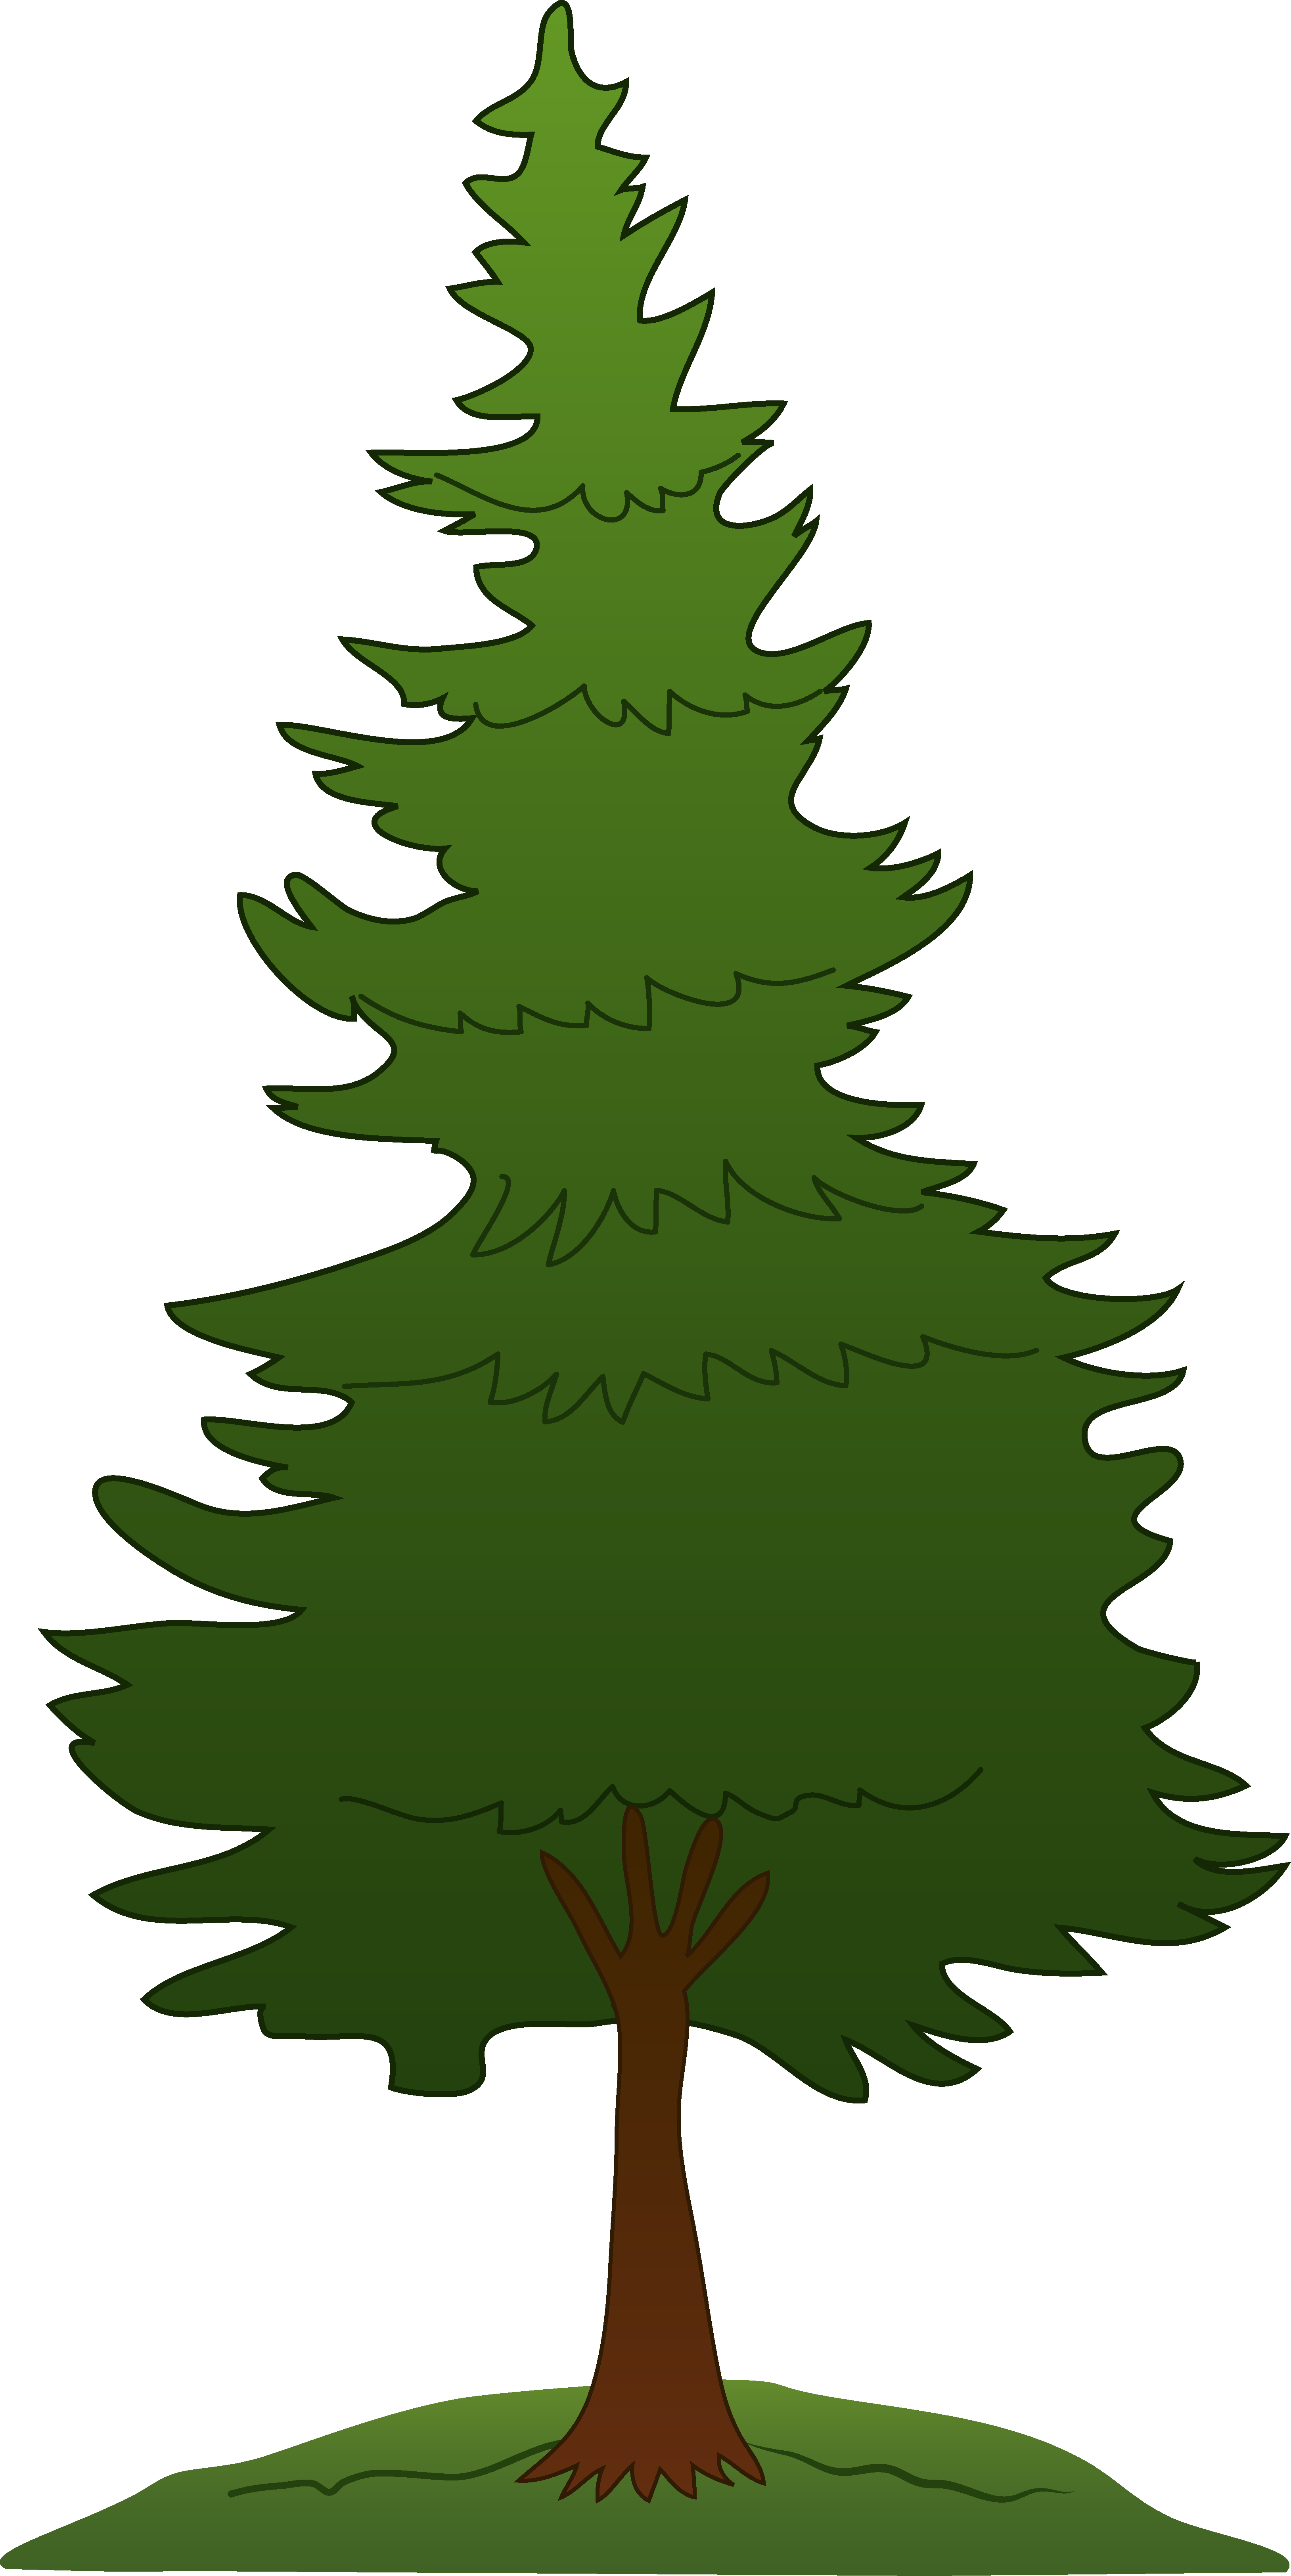 White pine tree silhouette. Night clipart forest